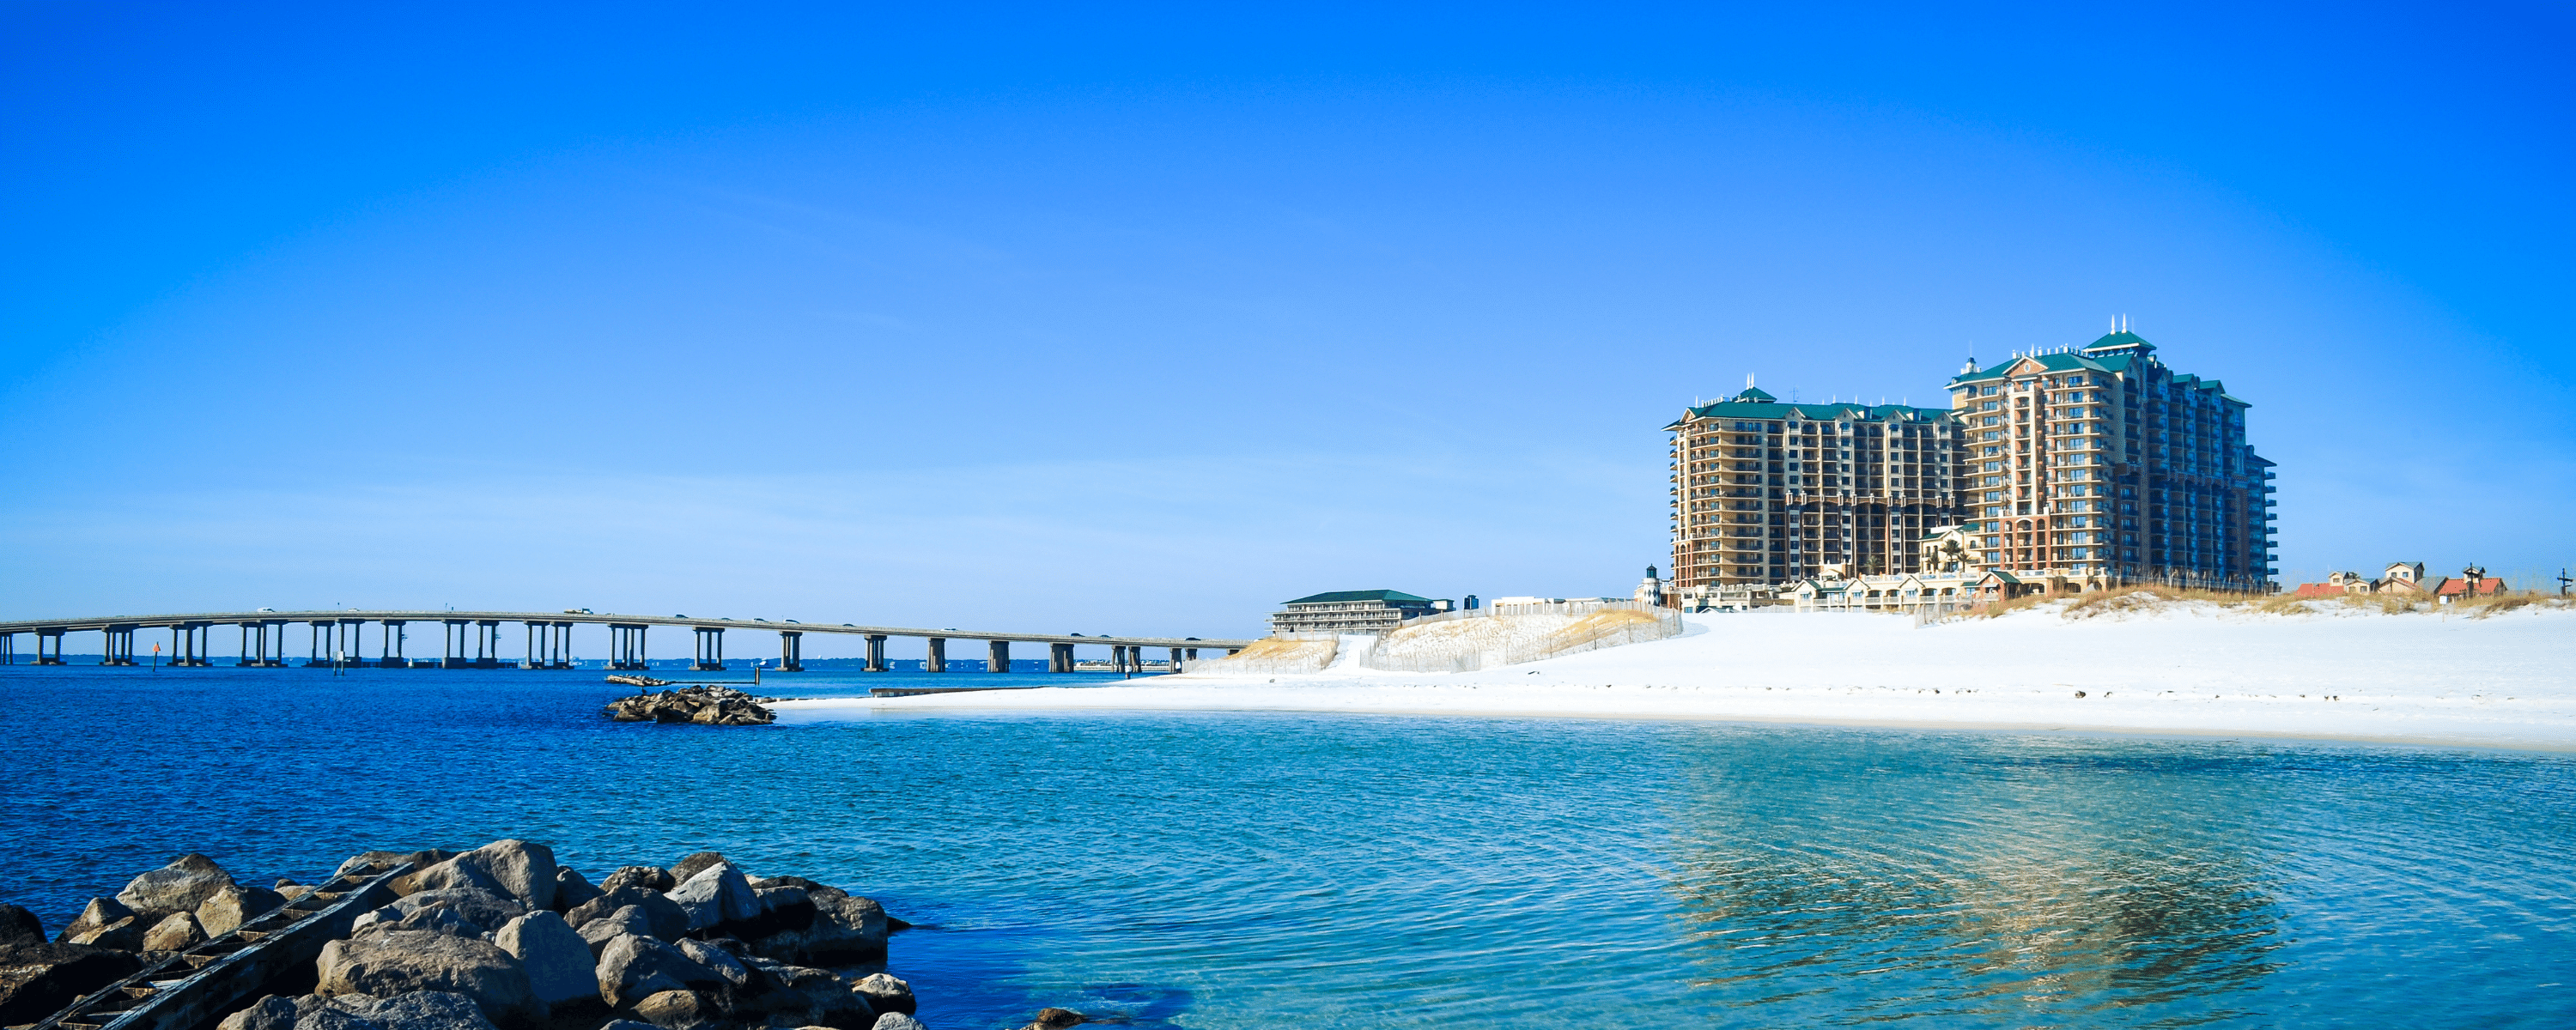 5 Reasons Why You Should Plan a November in Destin Vacation Harmony